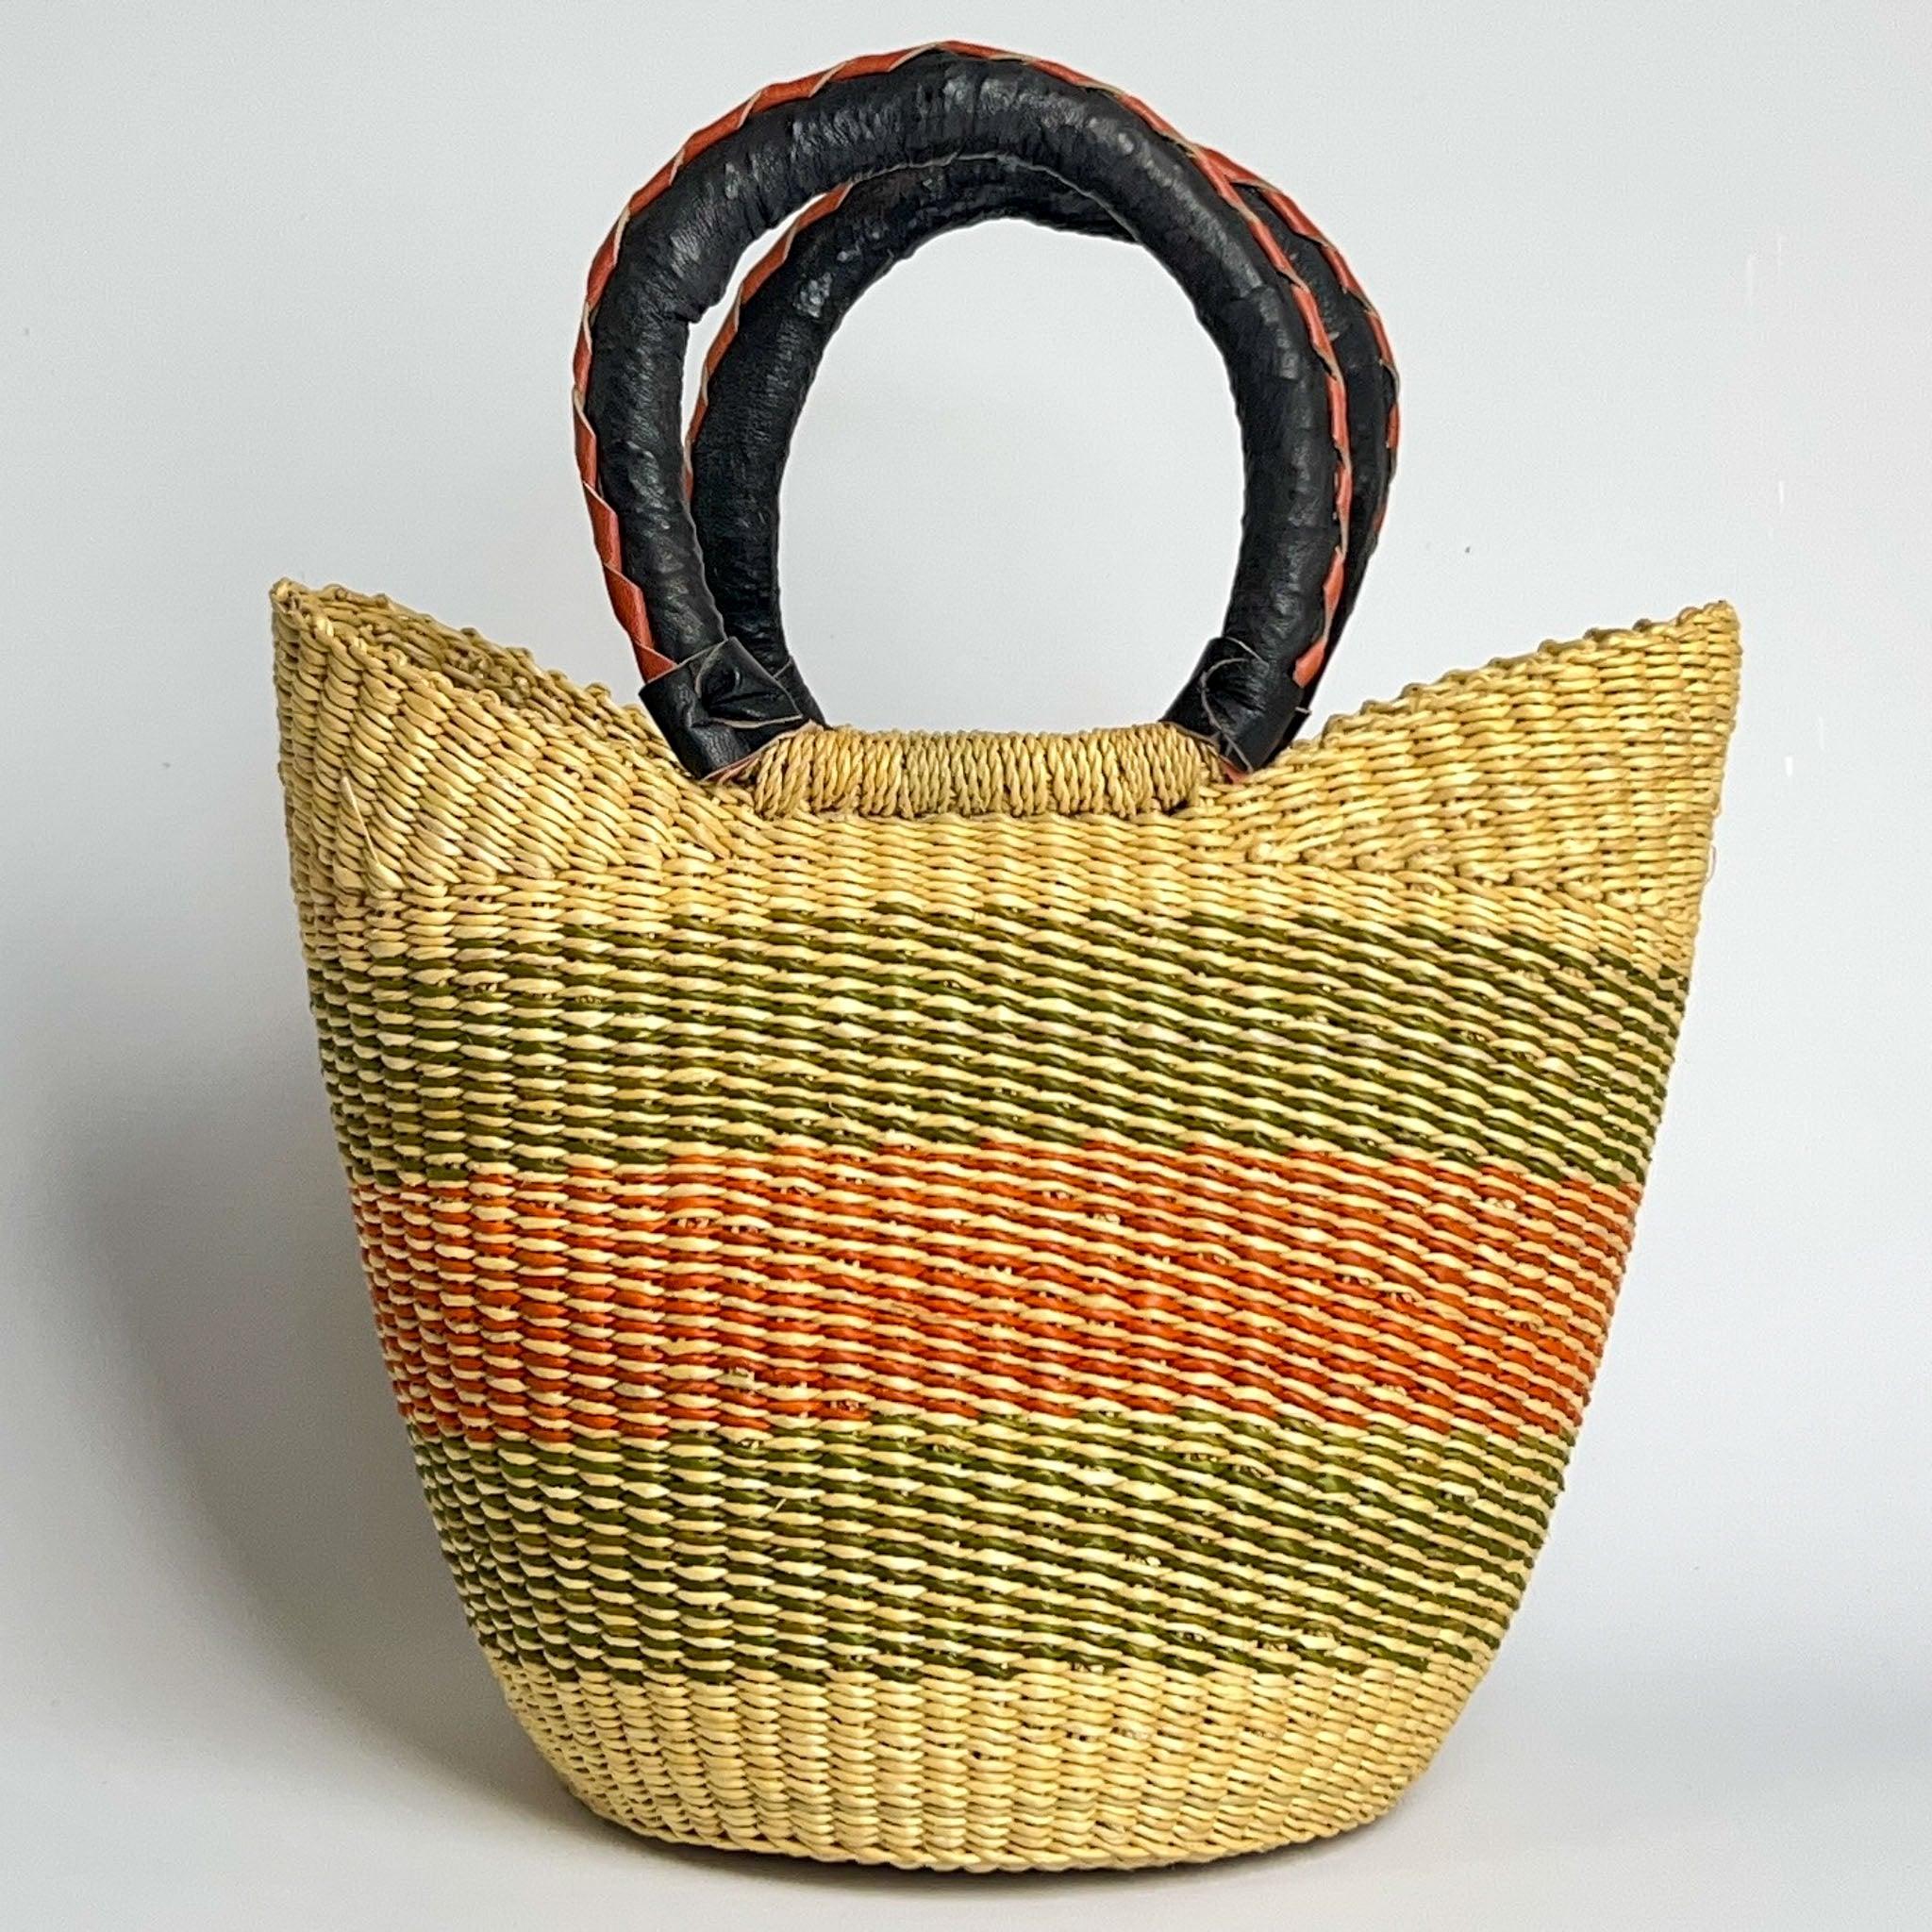 Traditional mini Ghanian shopper basket with black and tan leather handles, with natural tones and green and burnt orange striped pattern.